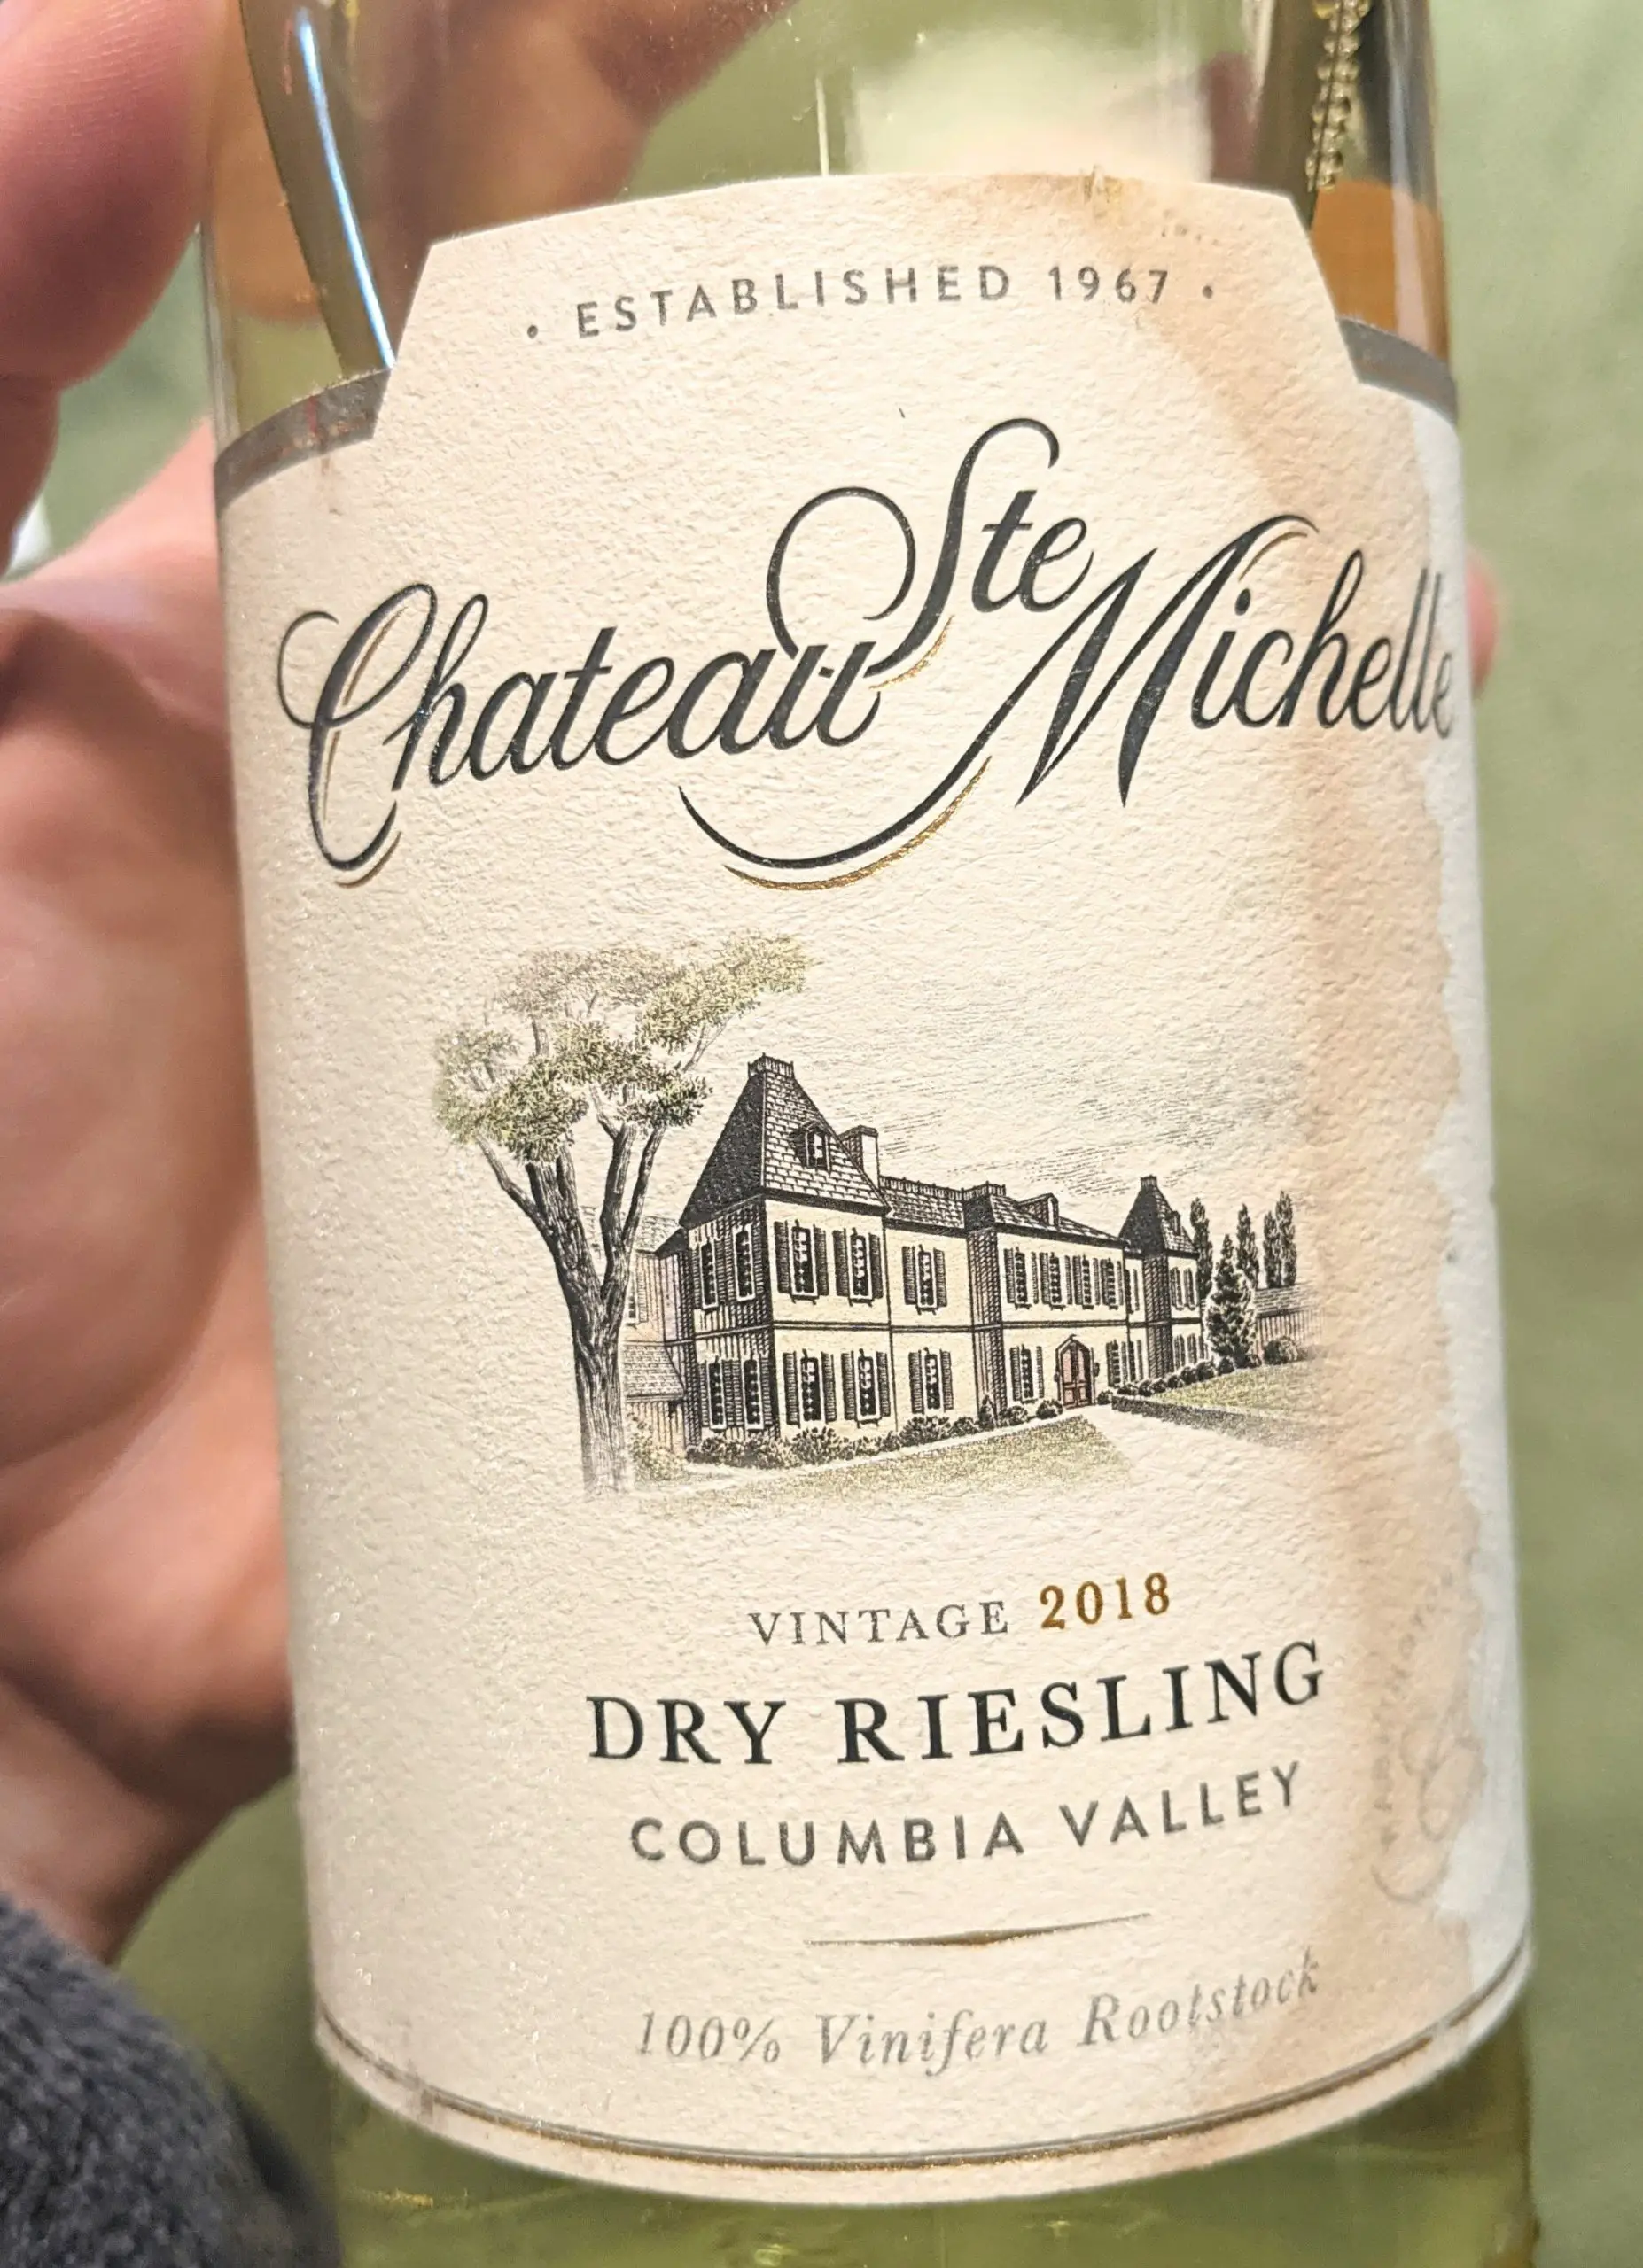 Chateau Ste Michelle 2018 Columbia Valley Dry Riesling - riesling wine guide